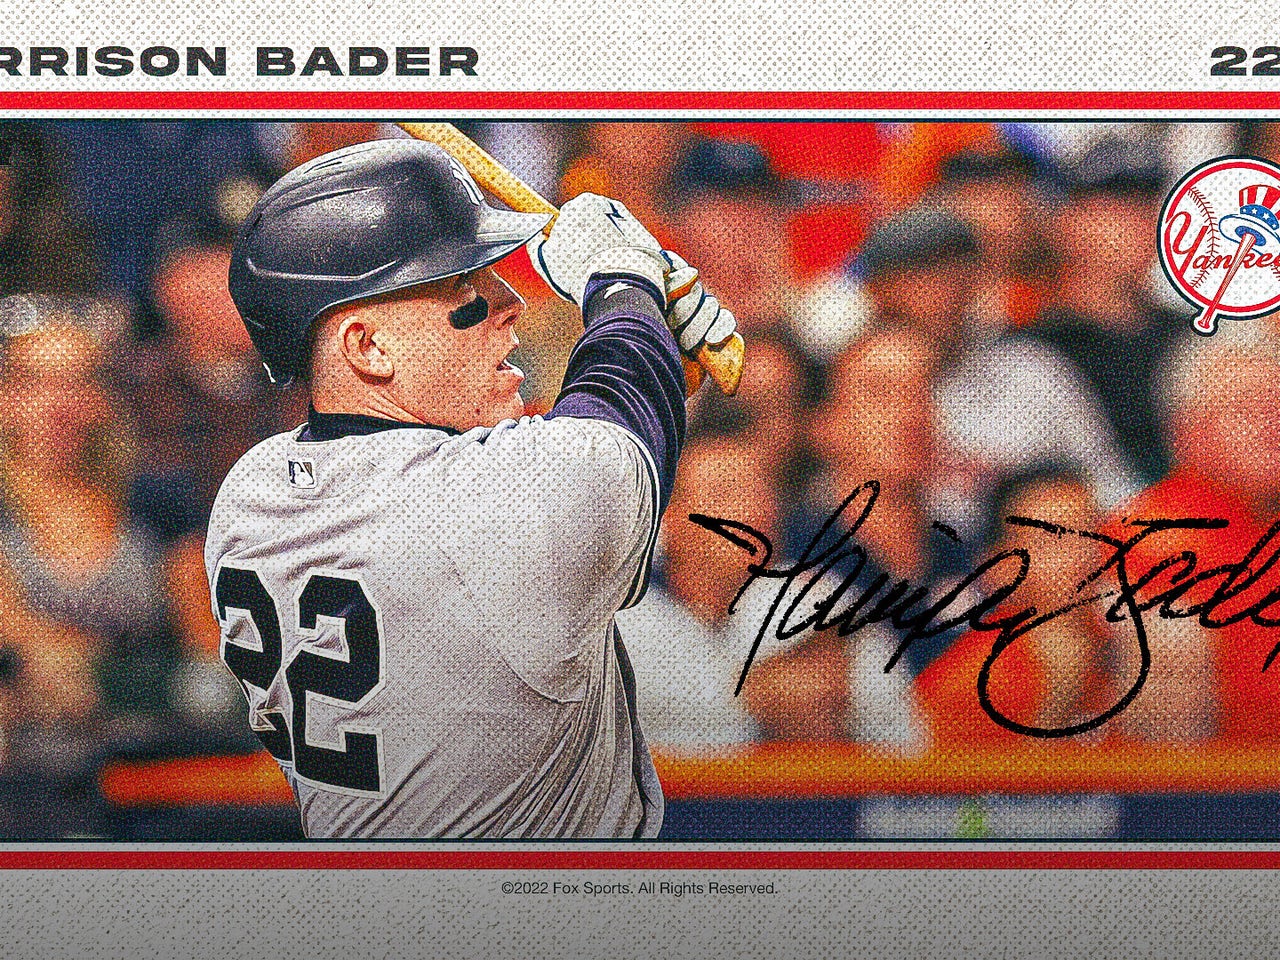 Eastchester NY roots for Harrison Bader in Yankees vs. Astros ALCS 2022